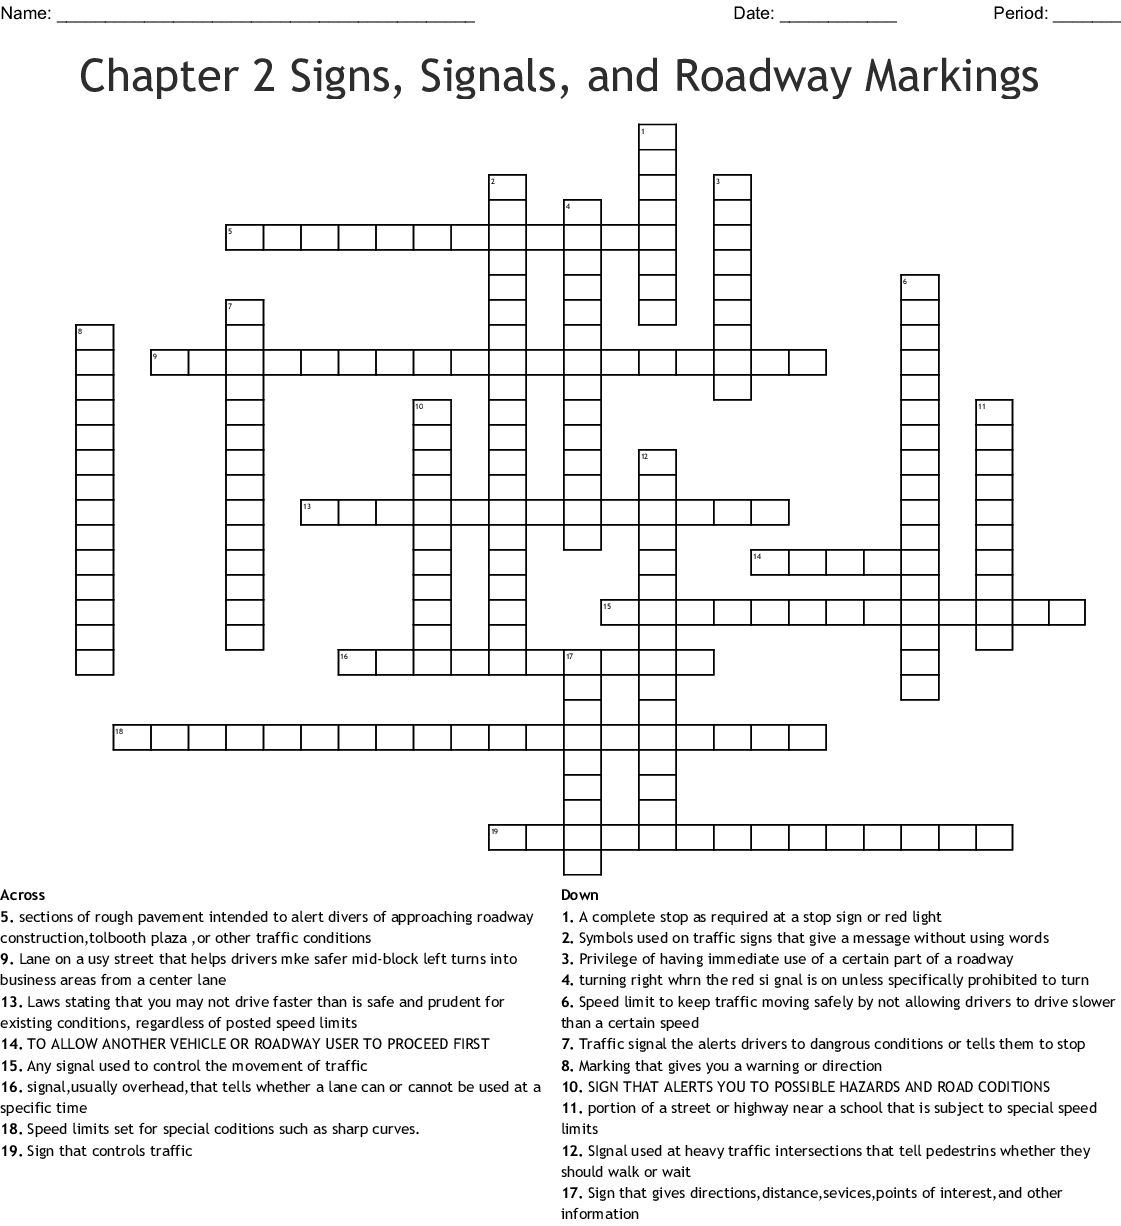 Chapter 2 Signs Signals And Roadway Markings Crossword  Wordmint And Chapter 2 Signs Signals And Roadway Markings Worksheet Answers